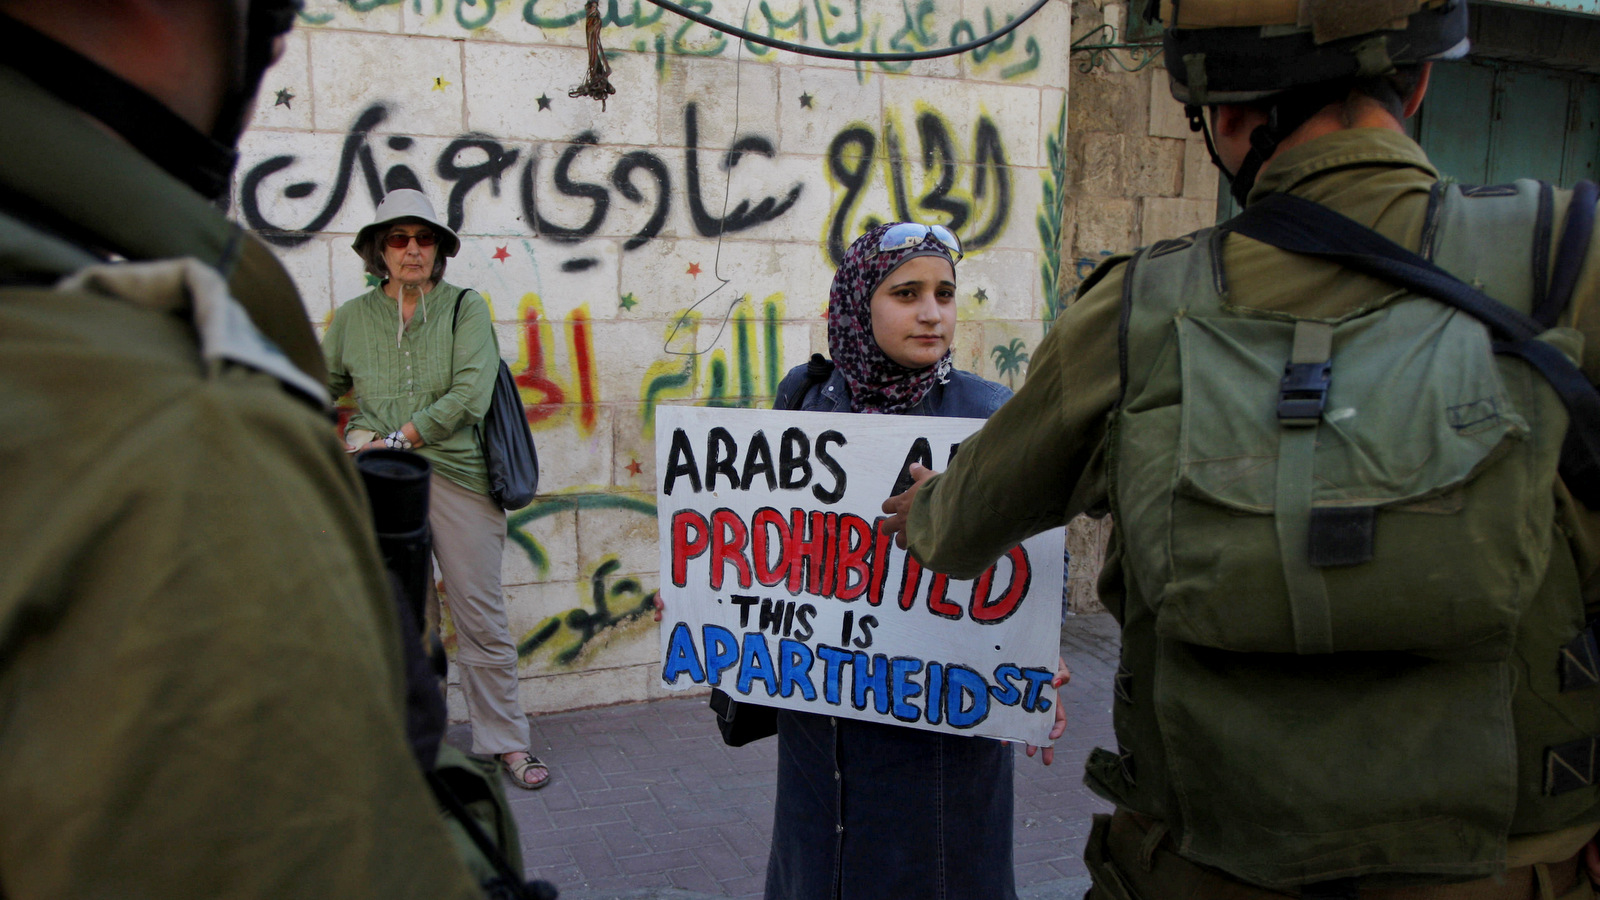 Israeli soldiers face activists from the Youth Against Settlements group during a demonstration against the closure of al-Shuhada street in Hebron, Sept. 14, 2011. Arabic graffiti on wall reads: "Hajj Shadi Arafat". (AP/Nasser Shiyoukhi)